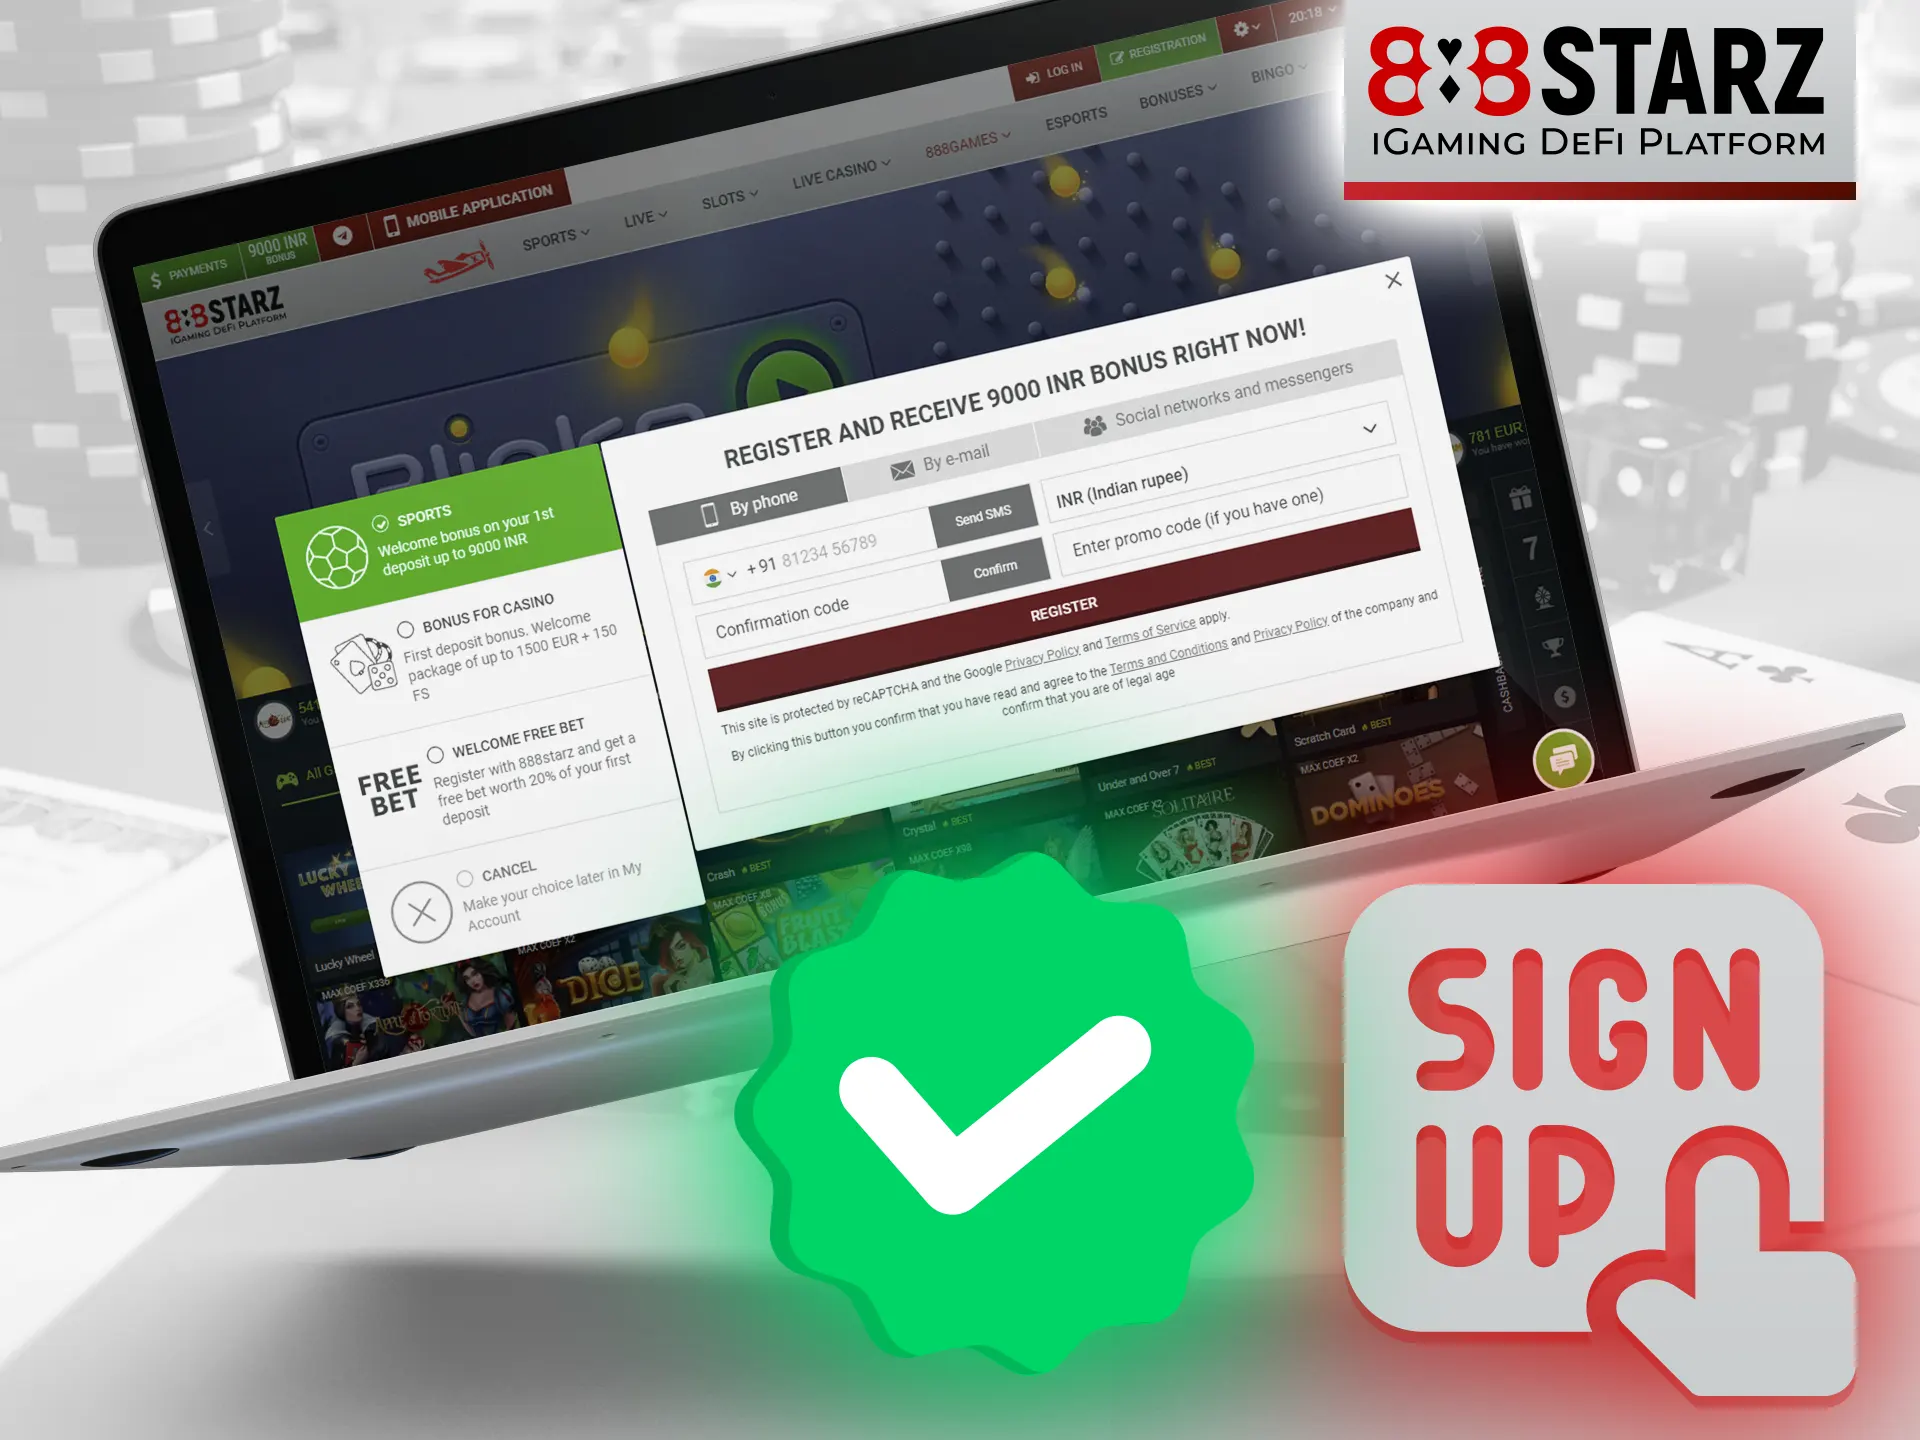 Register and verify on the 888starz website.